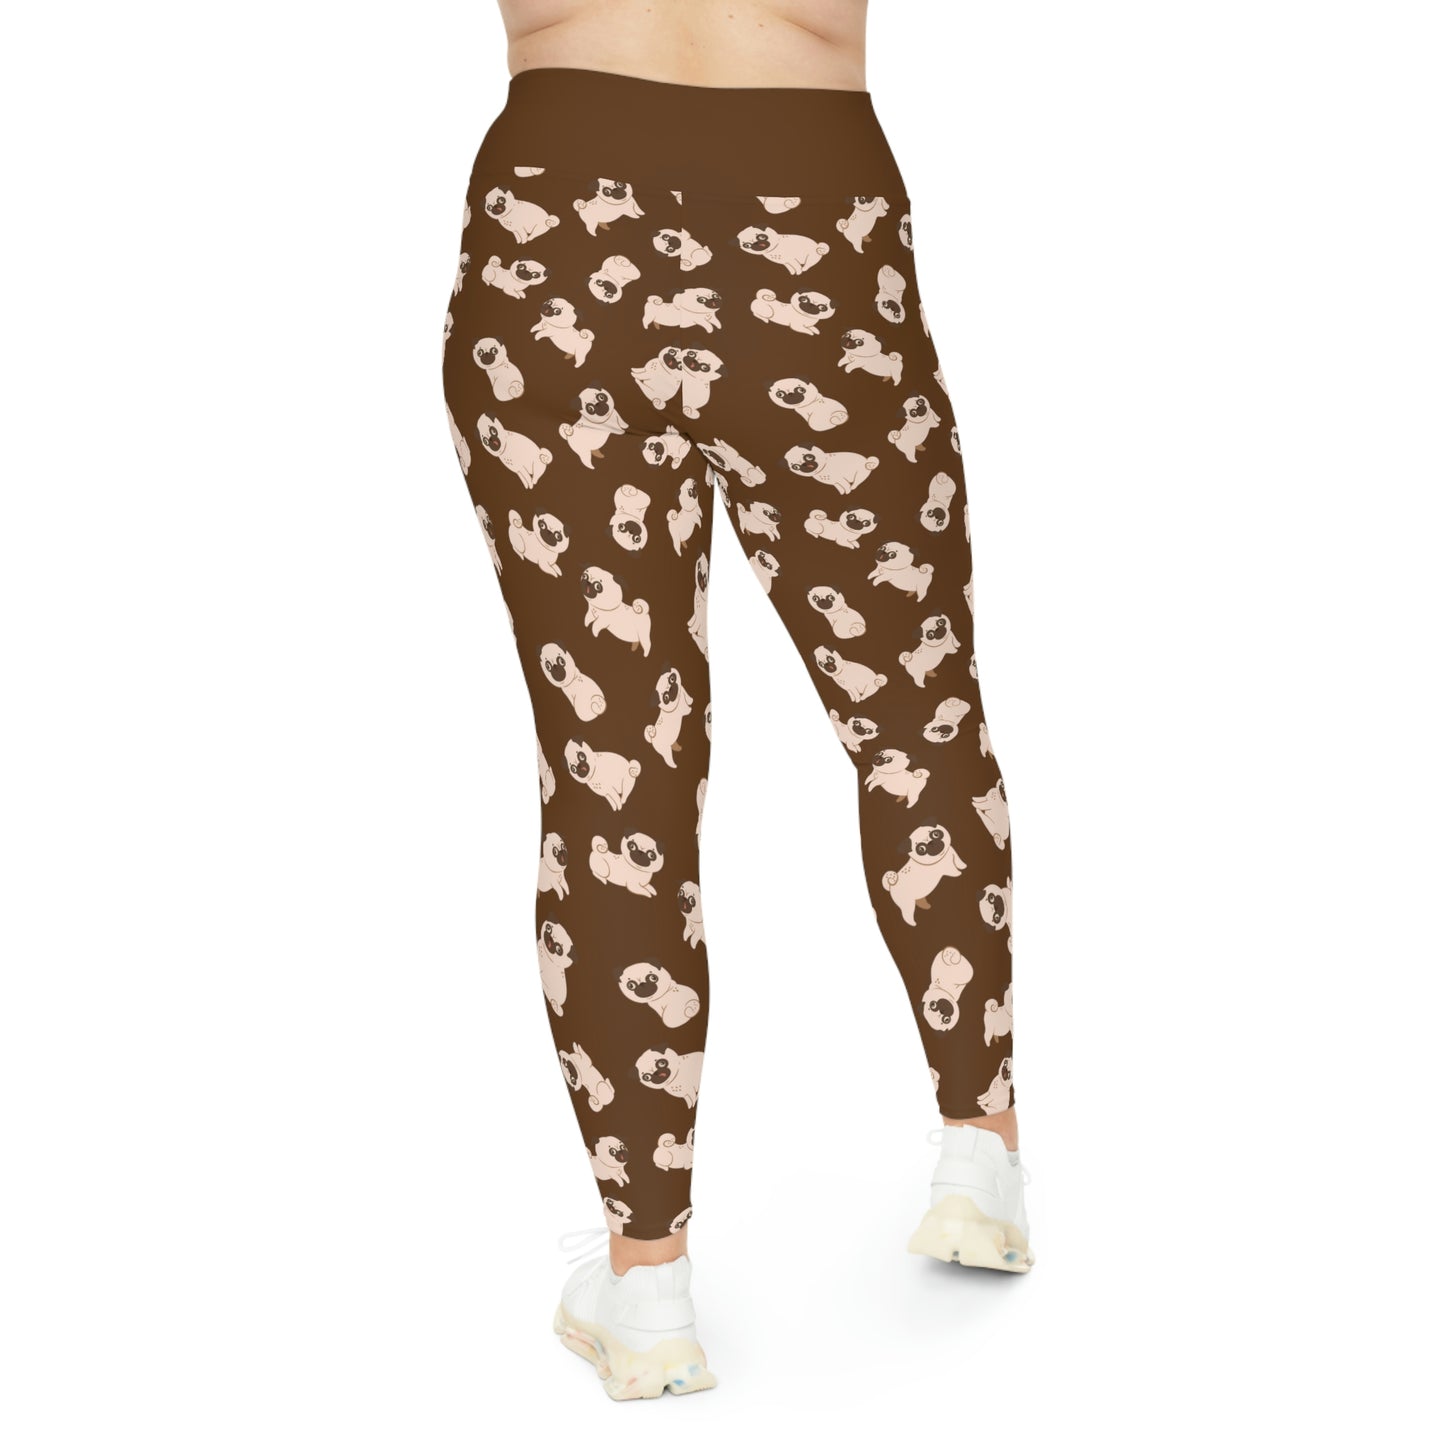 Dog Mom Plus Size Leggings One of a Kind Gift - Unique Workout Activewear tights for Mom fitness, Mothers Day, Girlfriend Christmas Gift